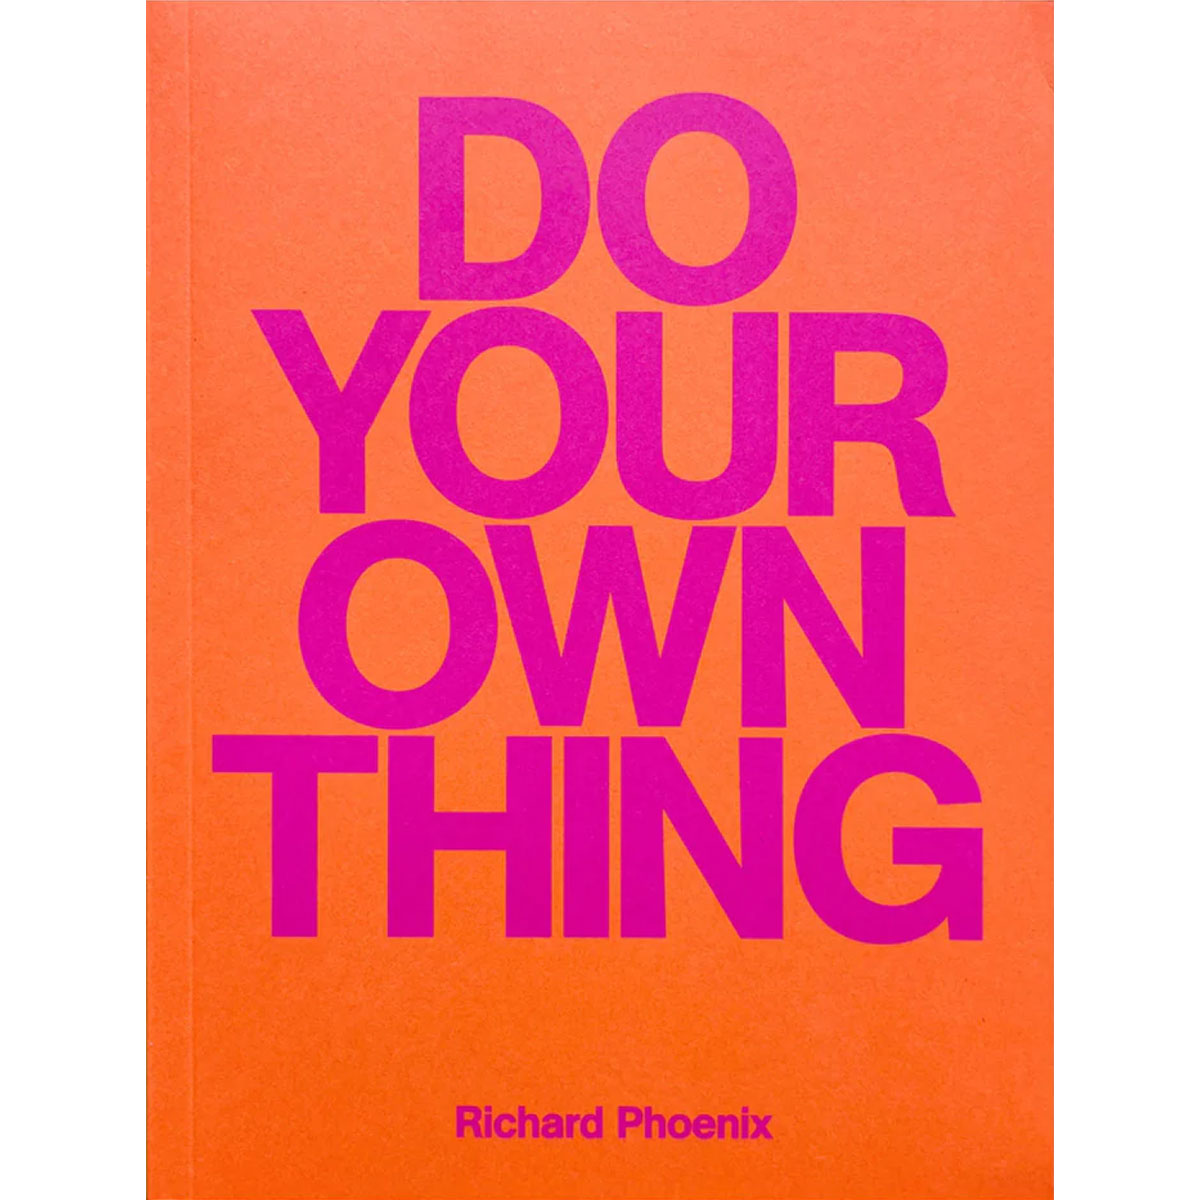 Richard Phoenix - Do Your Own Thing